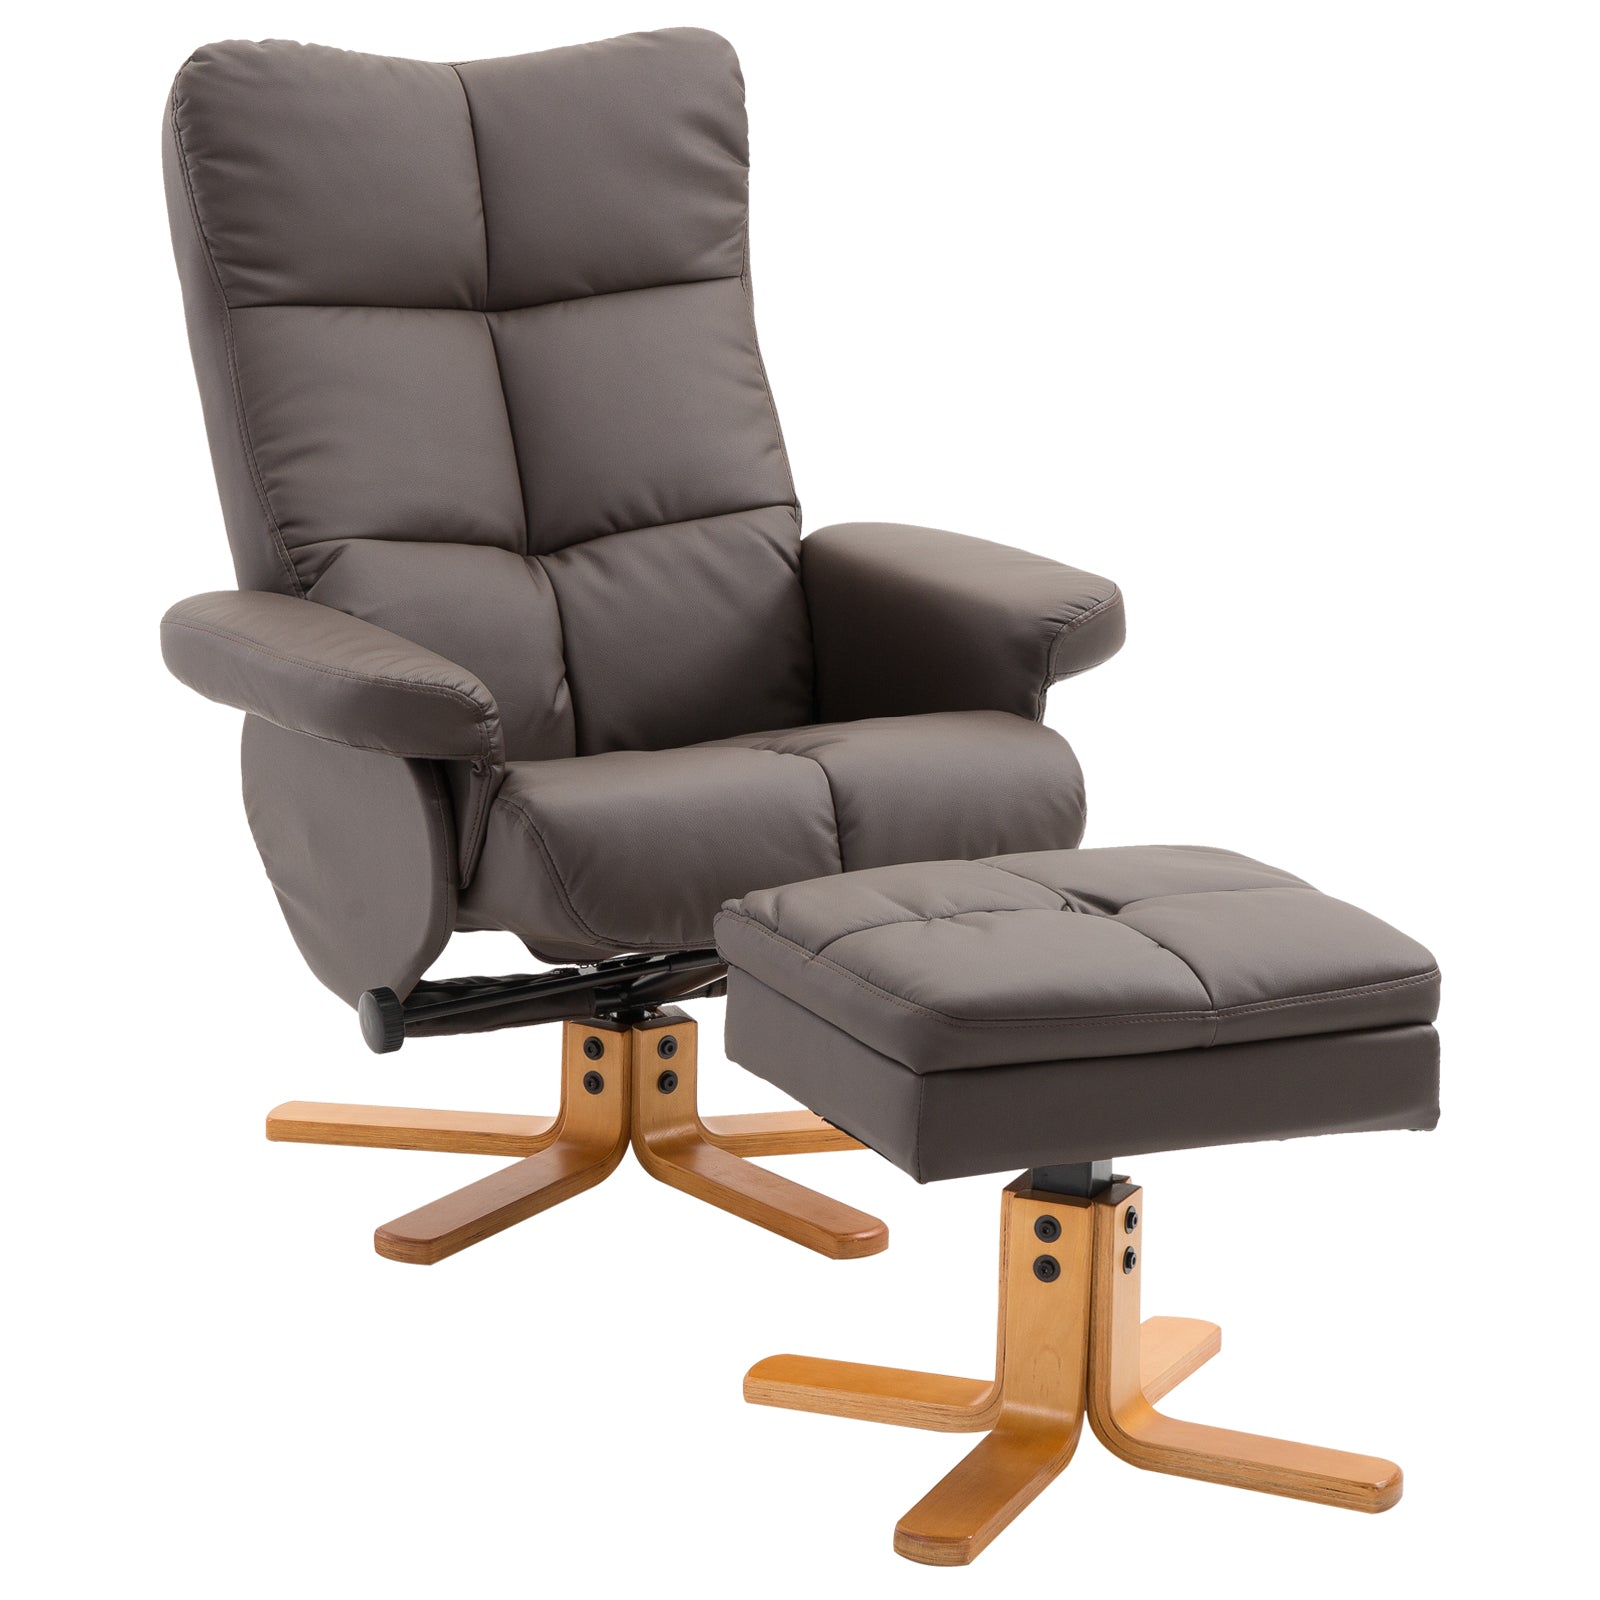 HOMCOM Recliner Chair and Footstool PU Leather Wooden Base Brown  | TJ Hughes